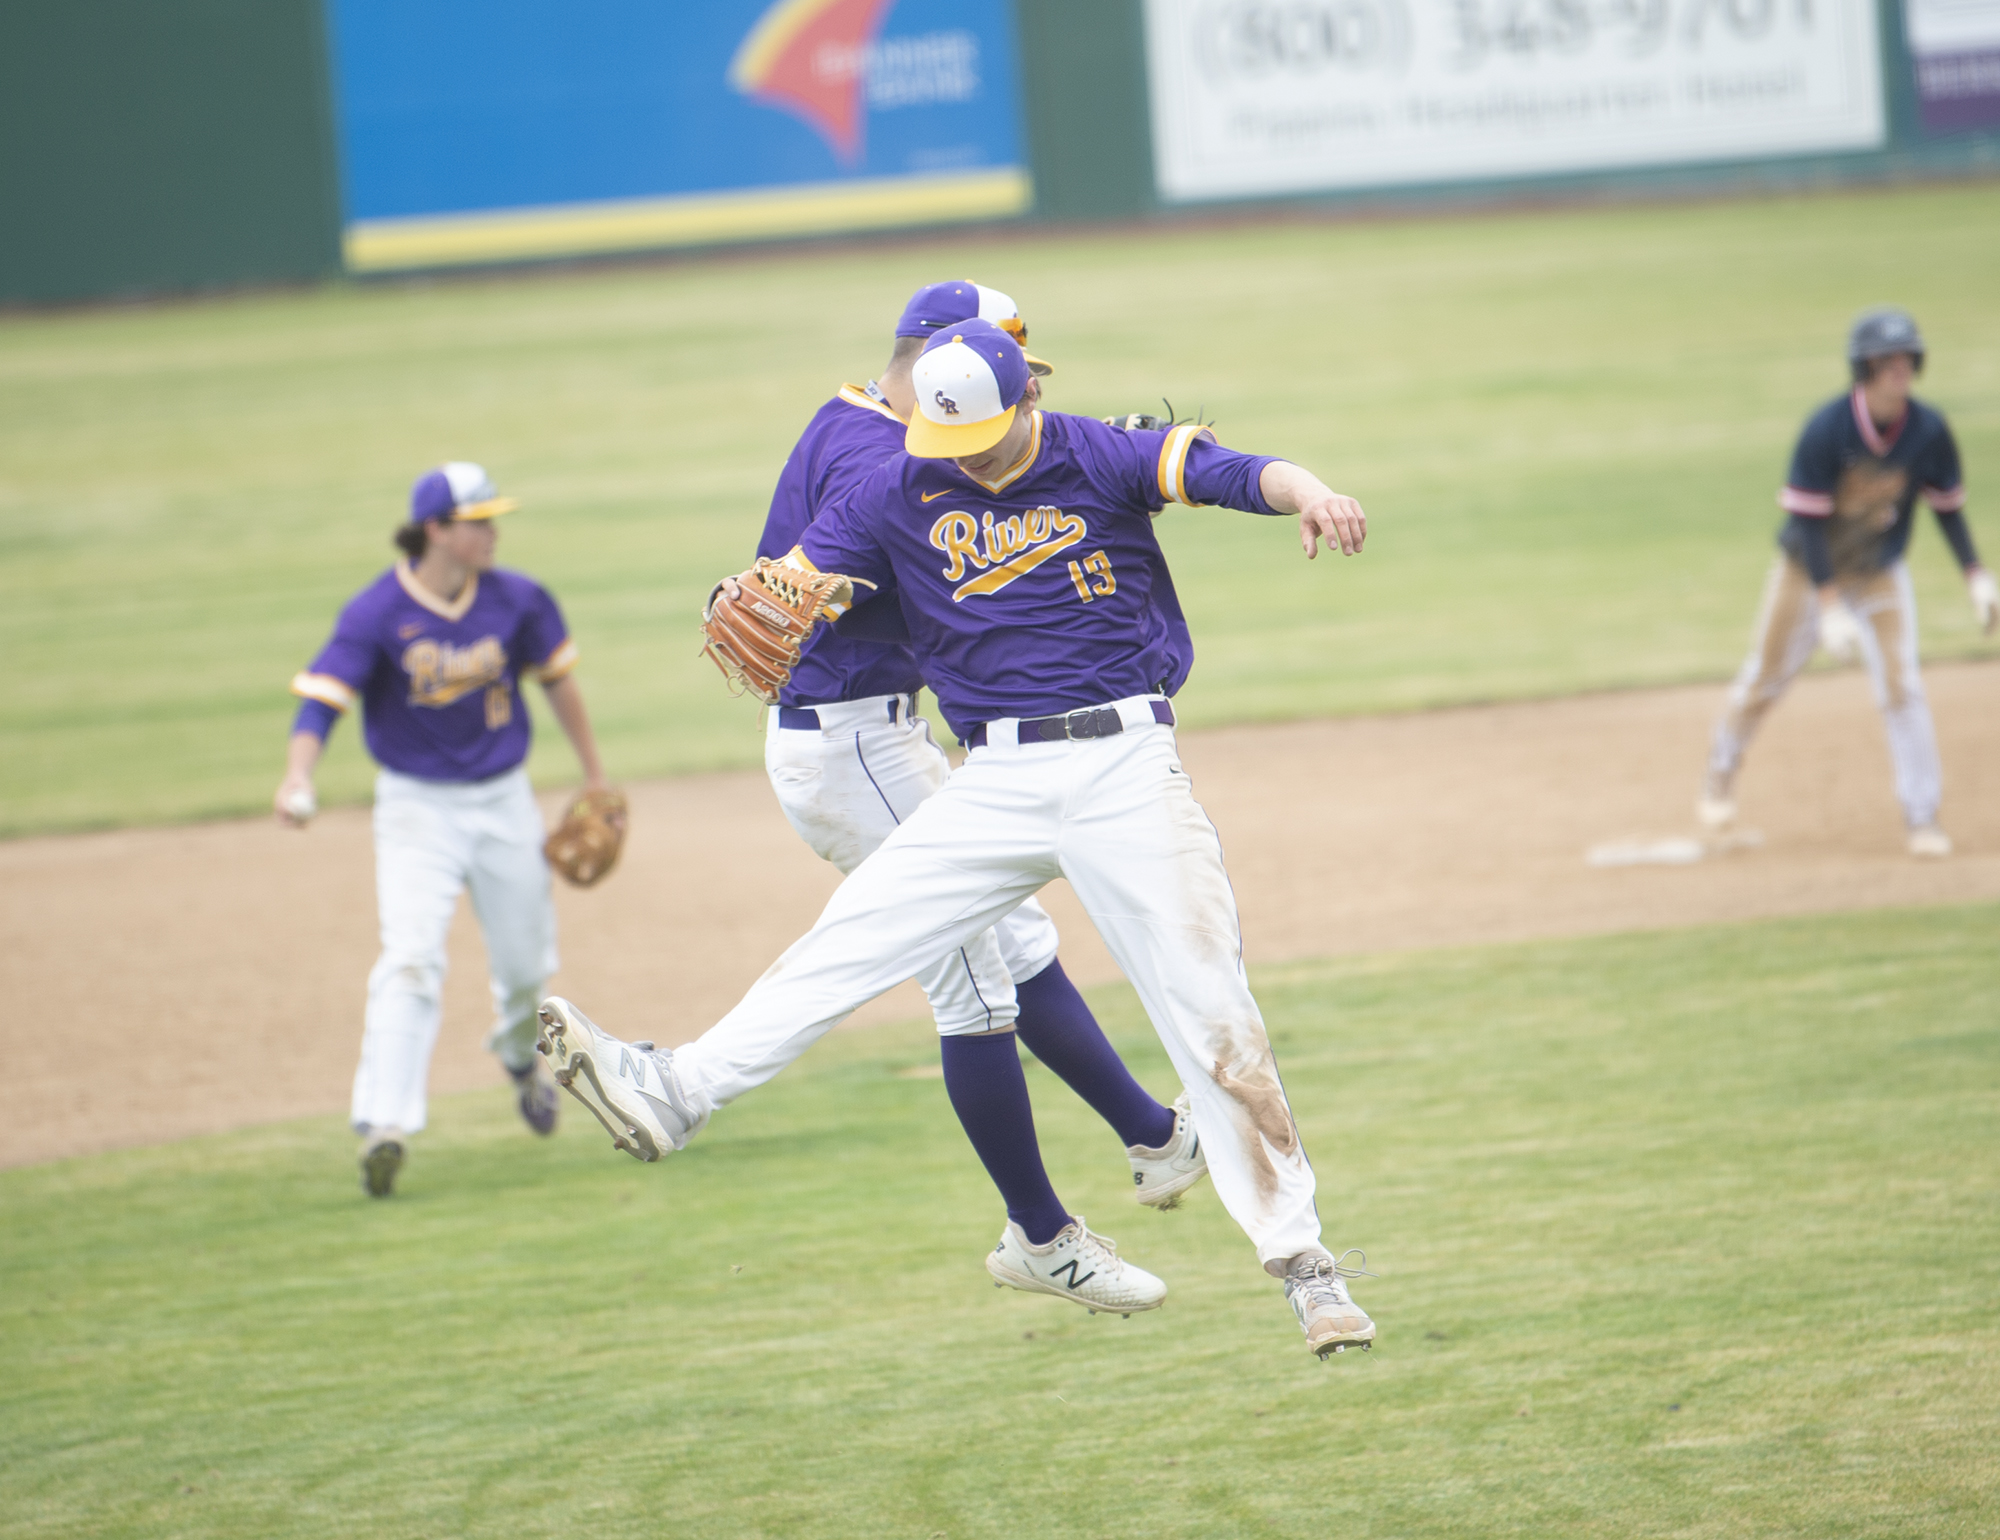 Columbia River's Sam Boyle (13) bumps Chris Parkin in celebration after the Rapids' 1-0 win over Ellensburg in the 2A state baseball semifinal at Yakima County Stadium on Friday, May 27, 2022.